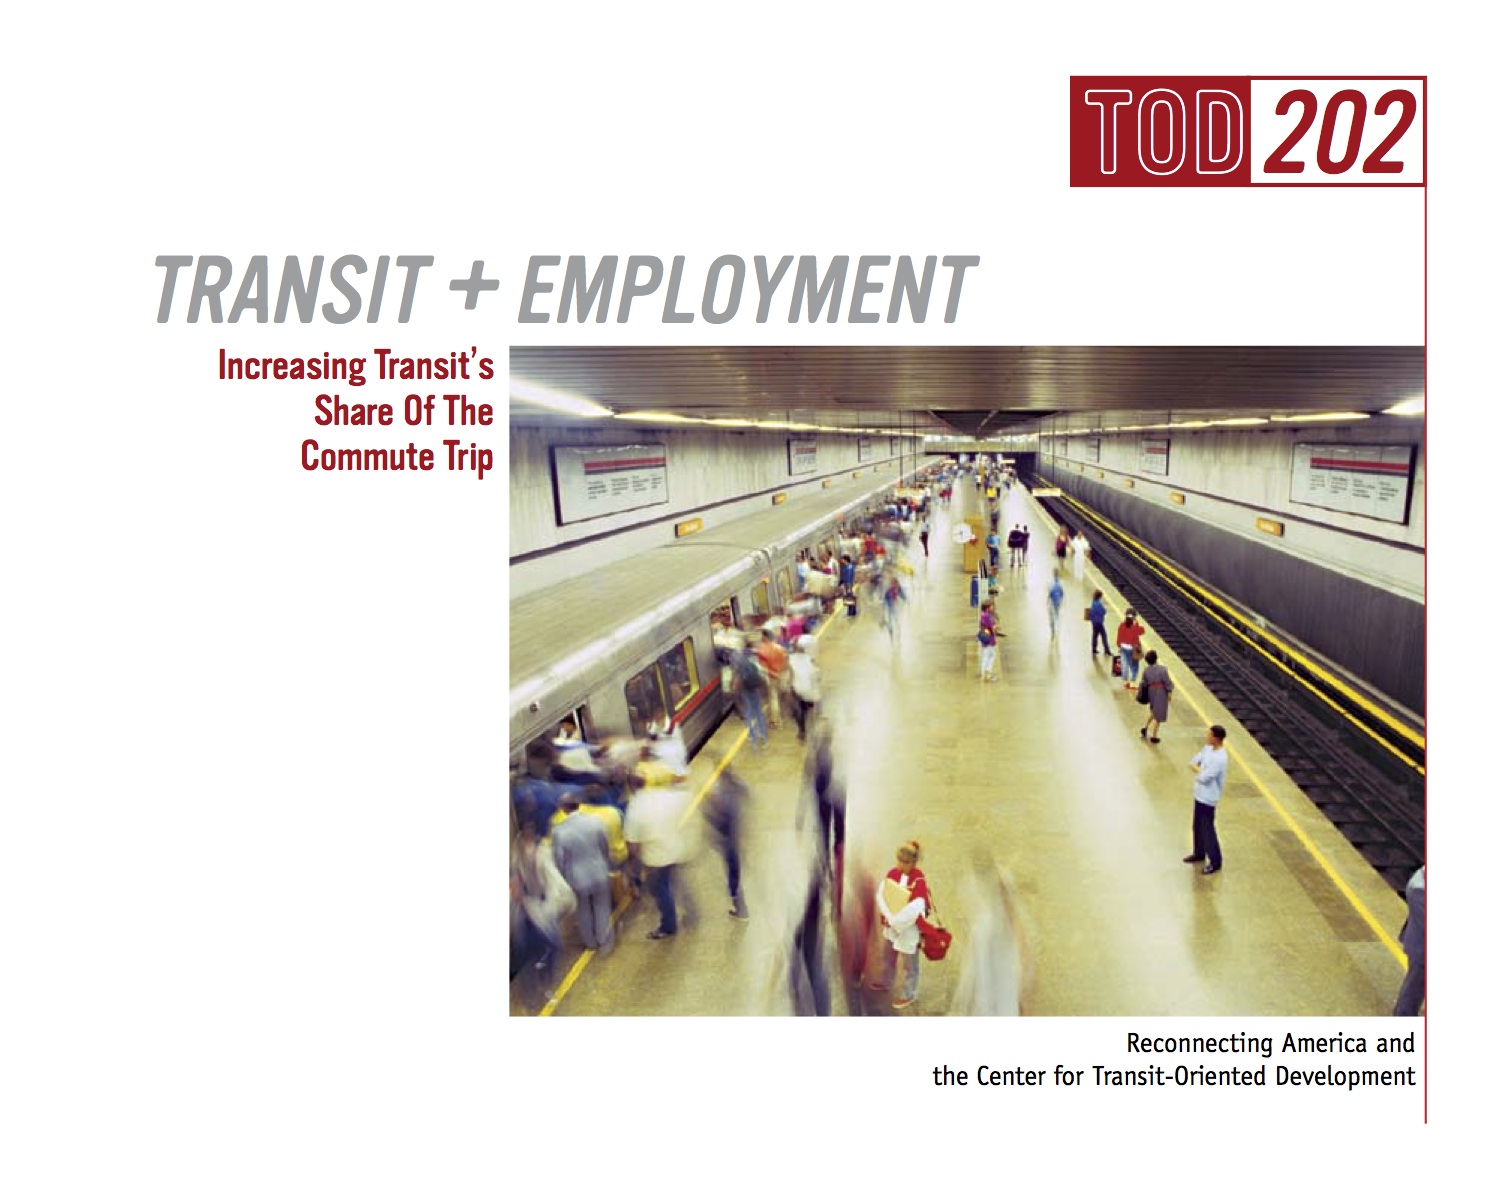 TOD 202: Transit & Employment – Increasing Transit’s Share Of The Commute Trip